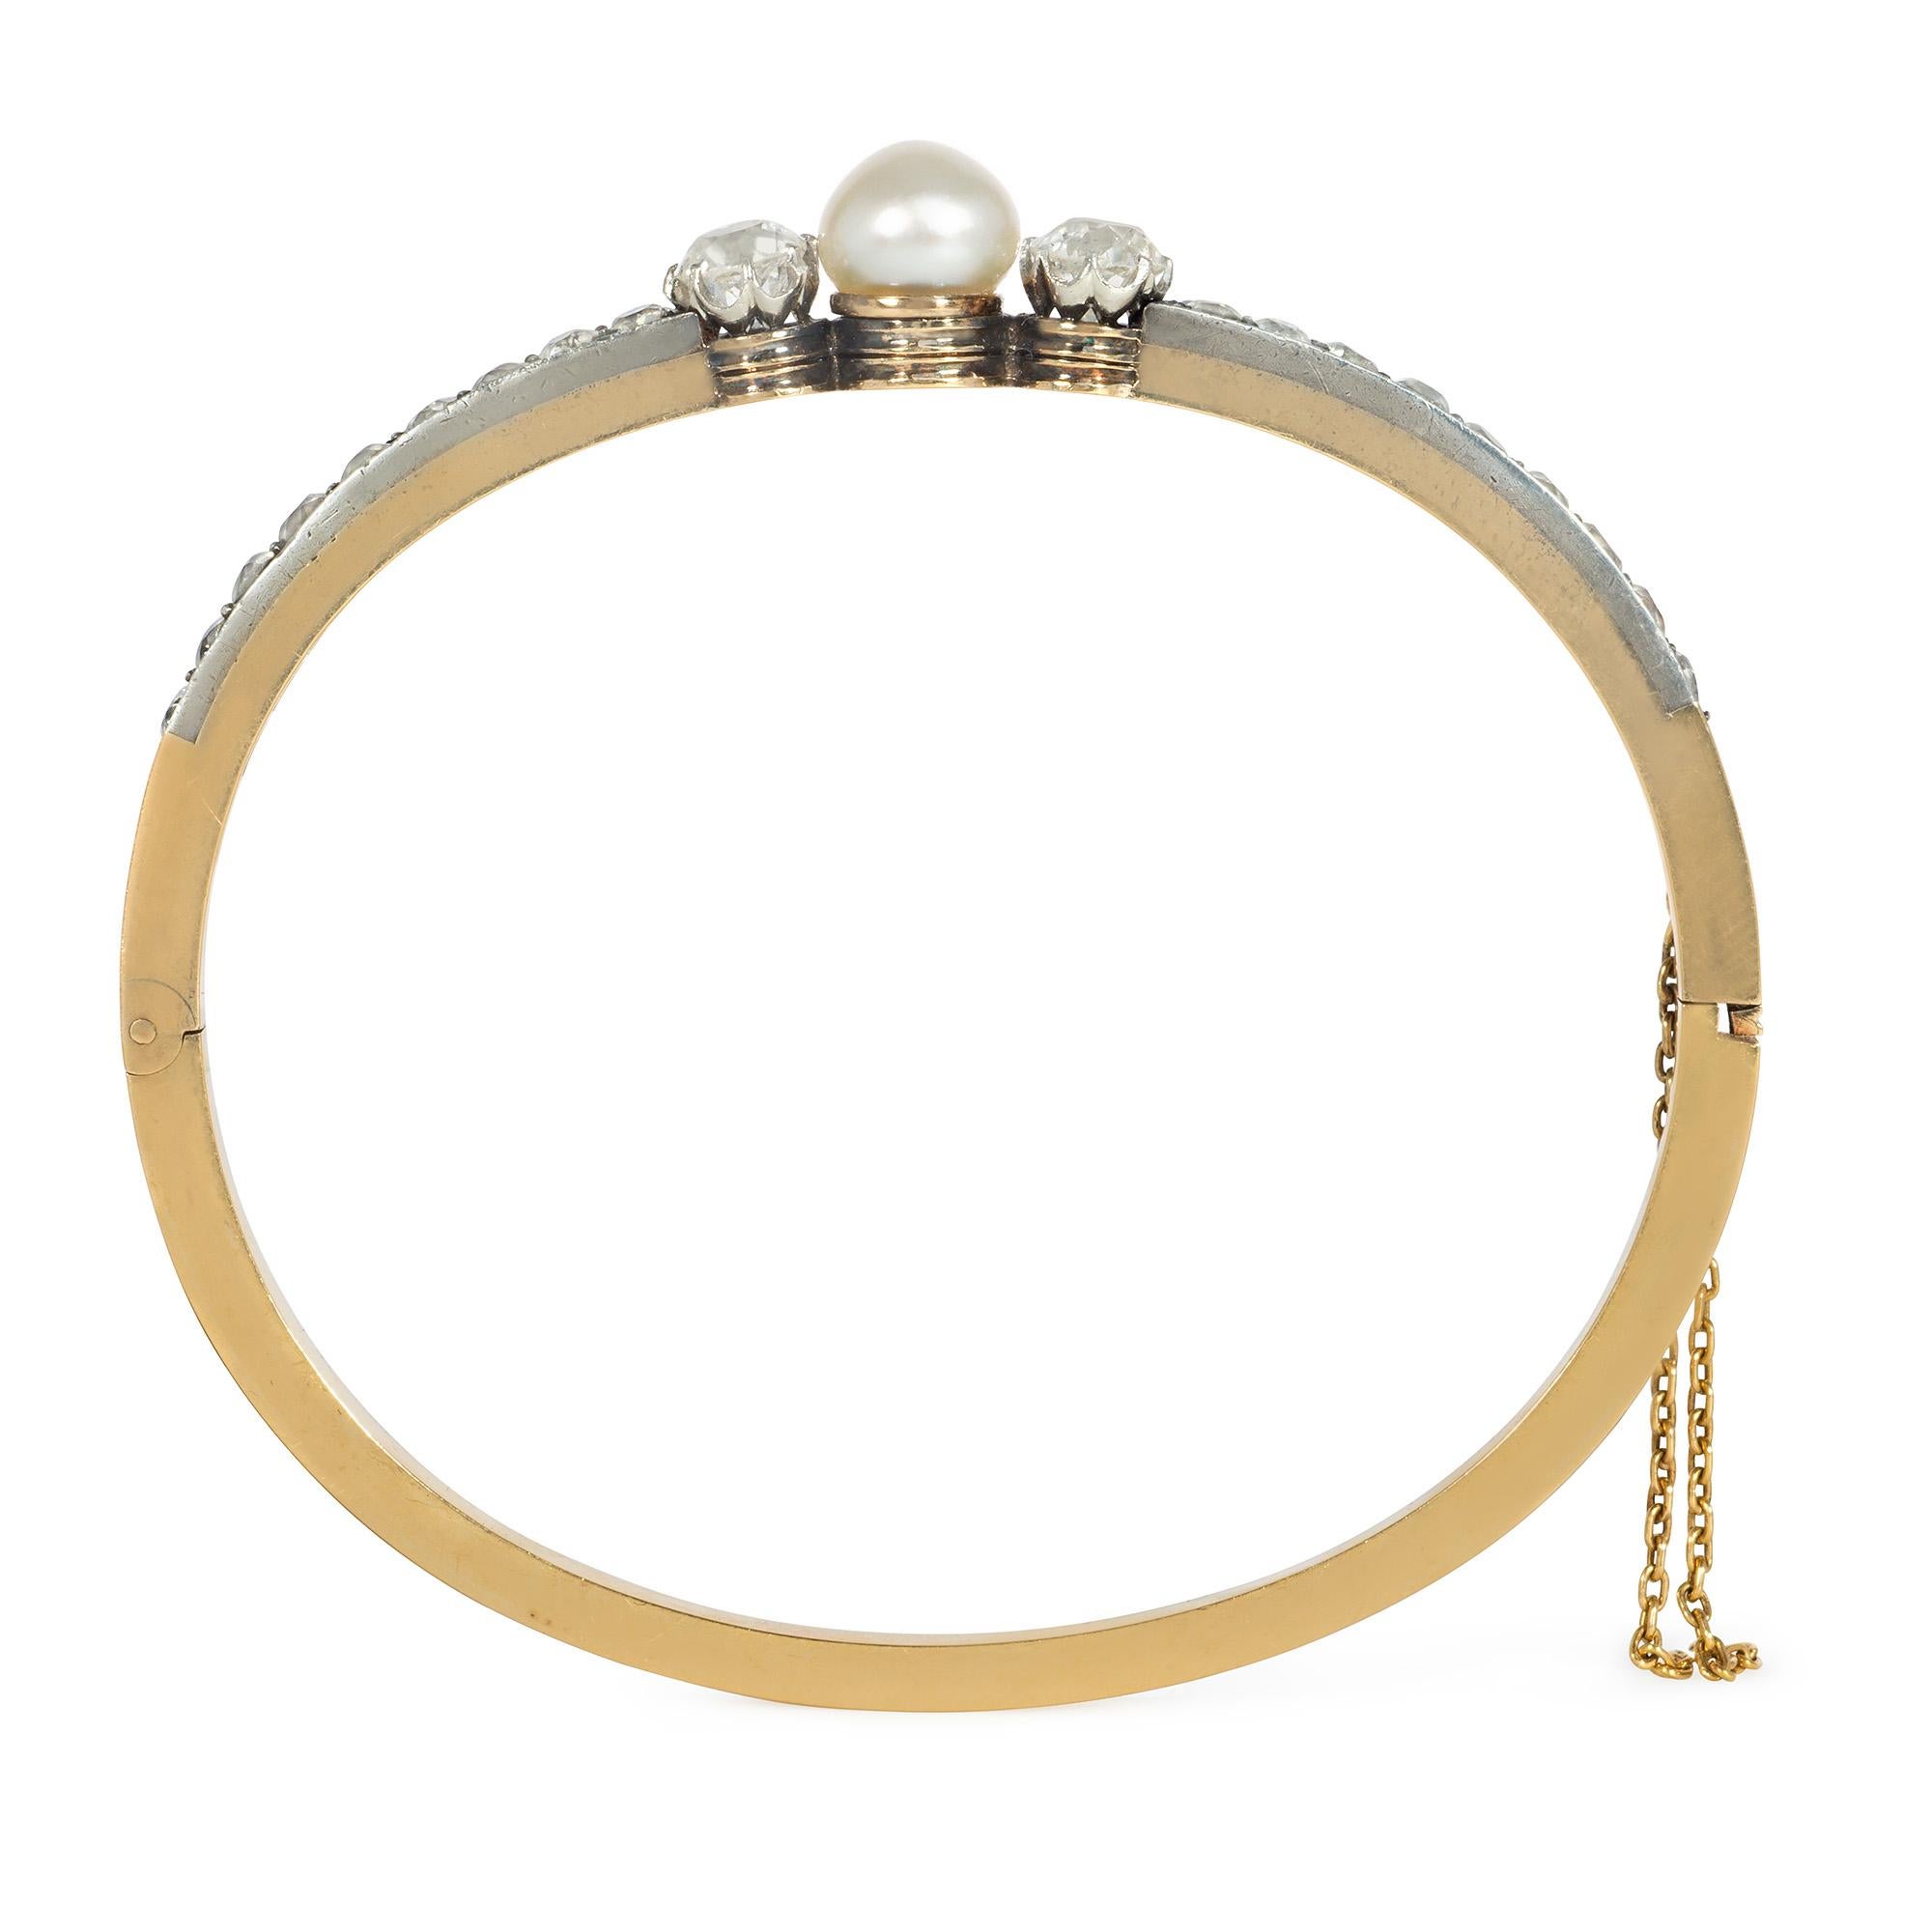 Victorian Antique French Old Cut Diamond and Pearl Bangle Bracelet in Silver-Topped Gold For Sale